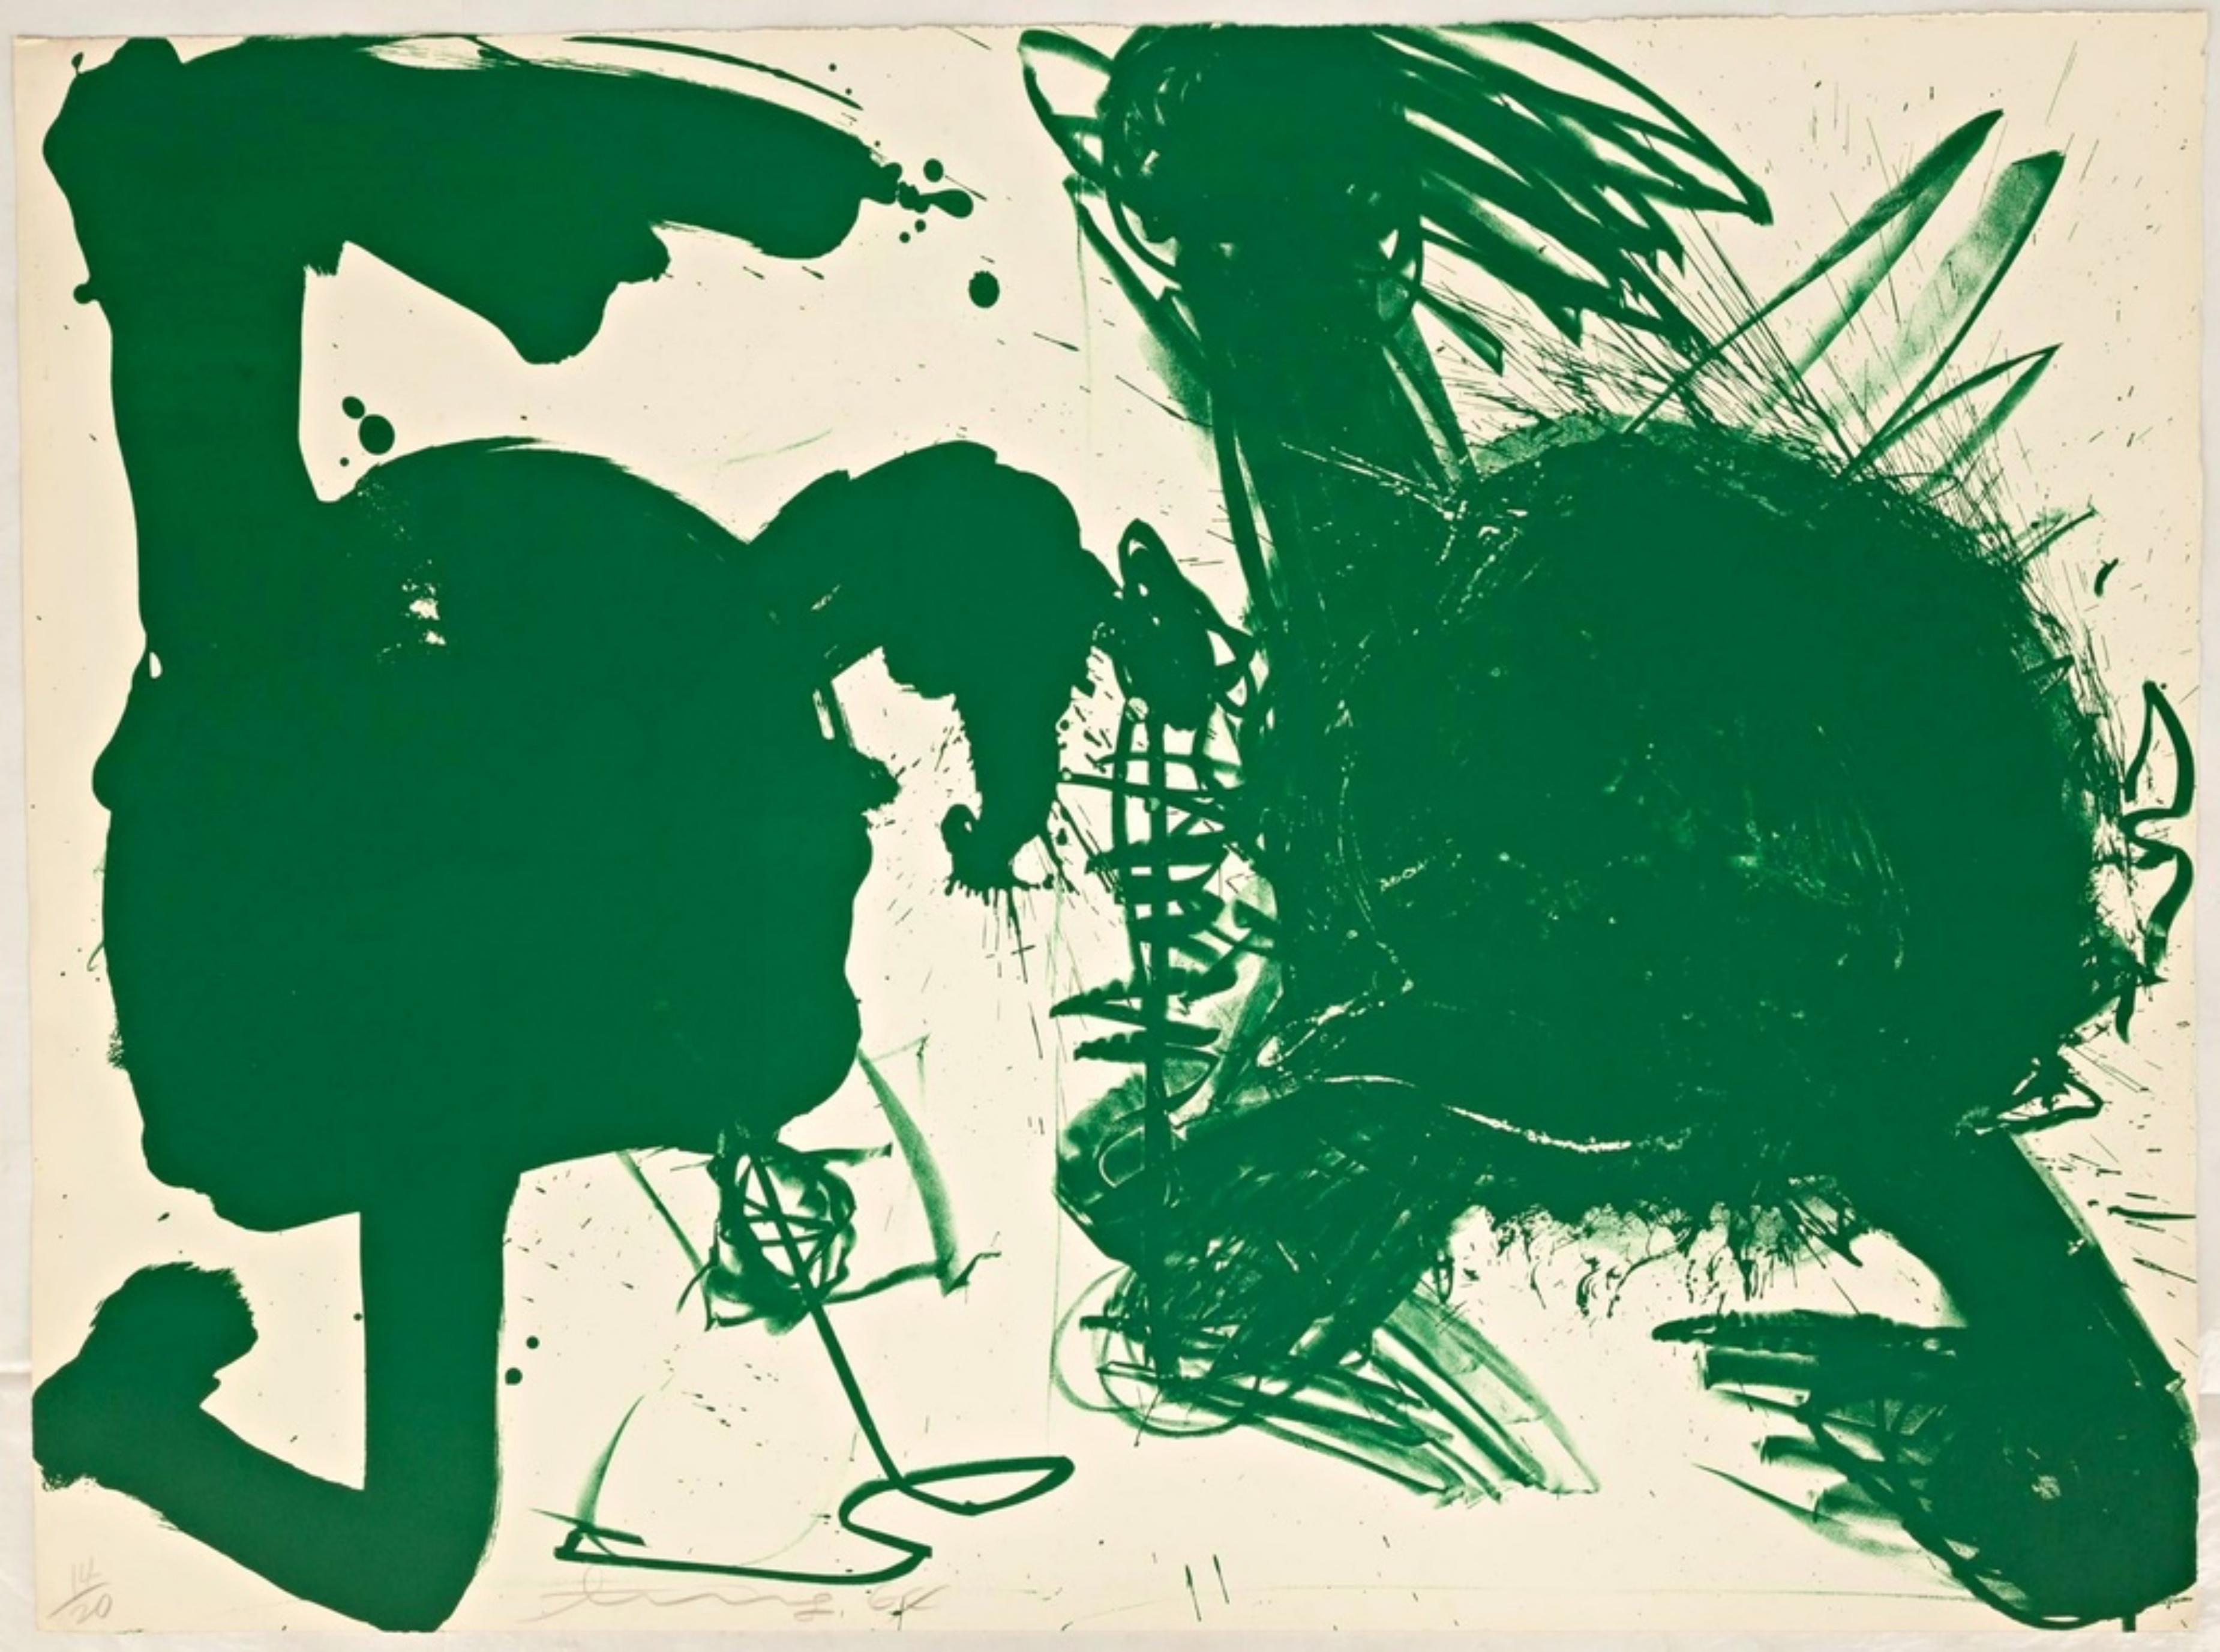 Walasse Ting Abstract Print - Green Bombshell, Hollywood Honeymoon (Abstract Expressionist Lithograph Signed)